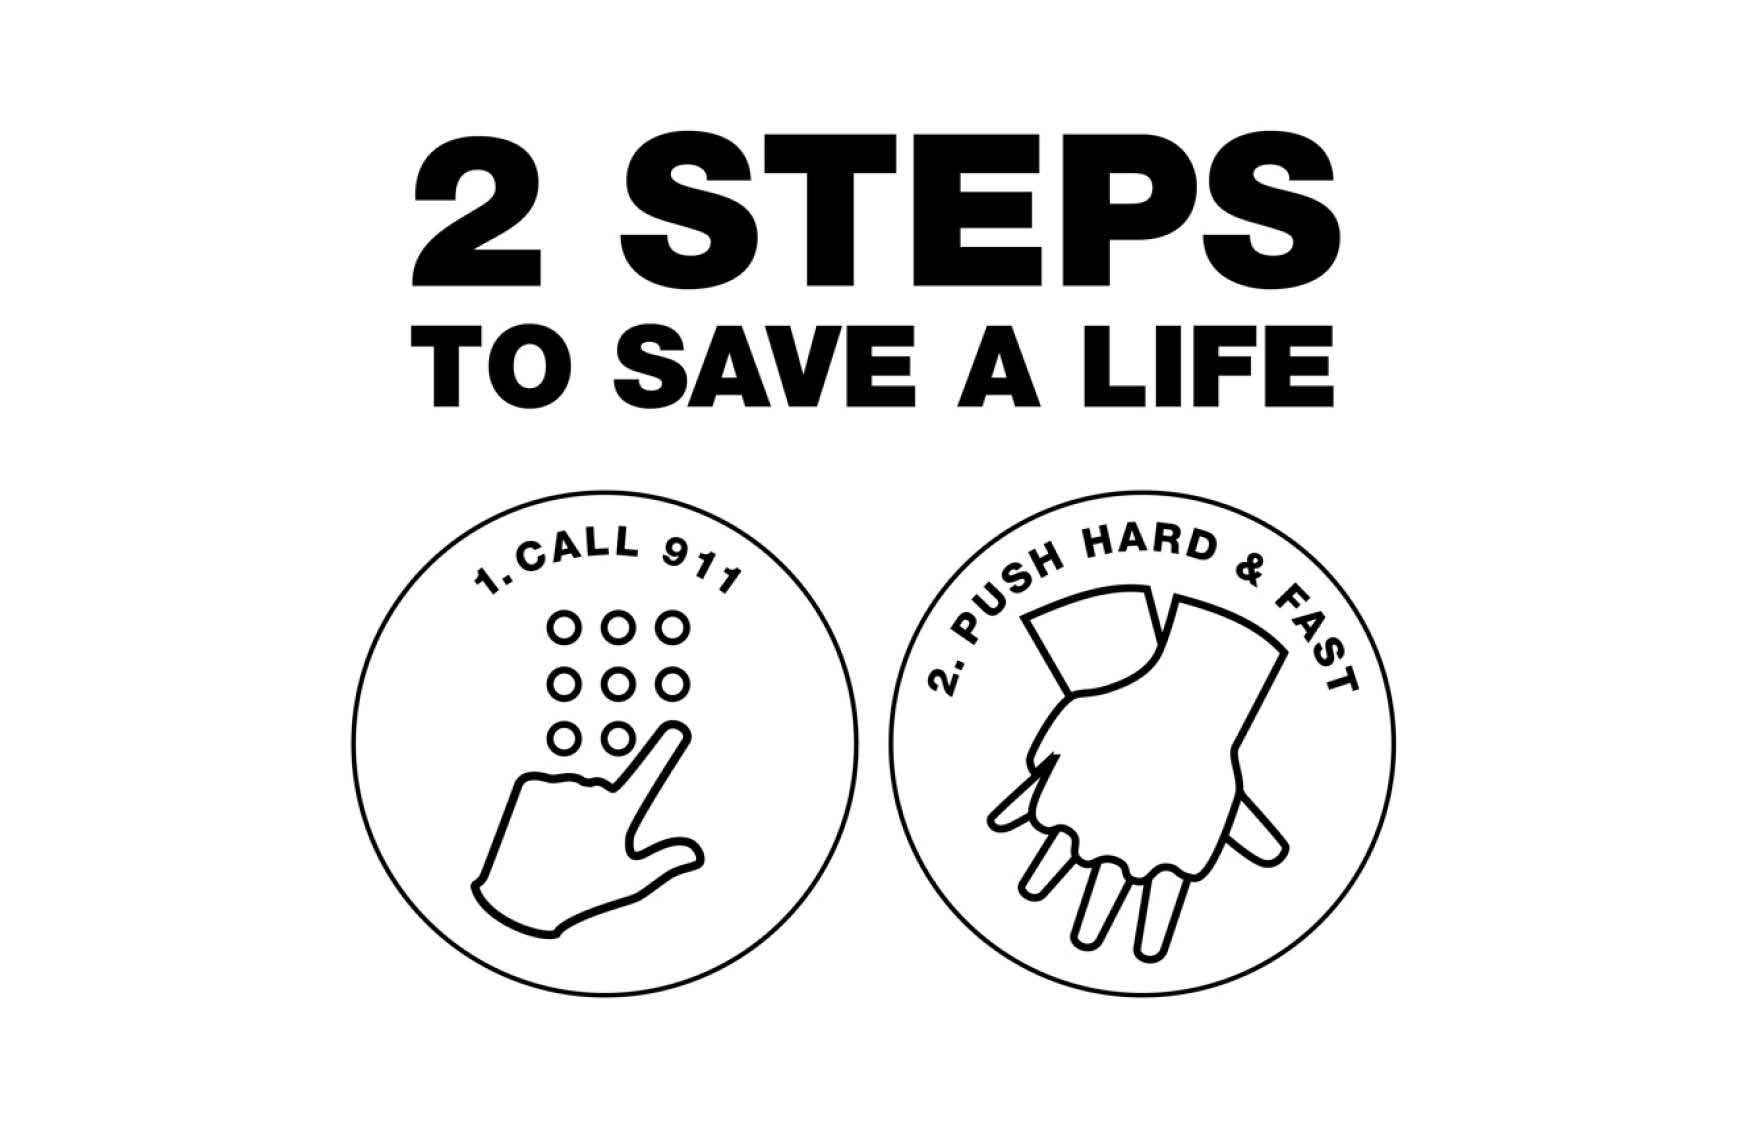 2 STEPS to save a life